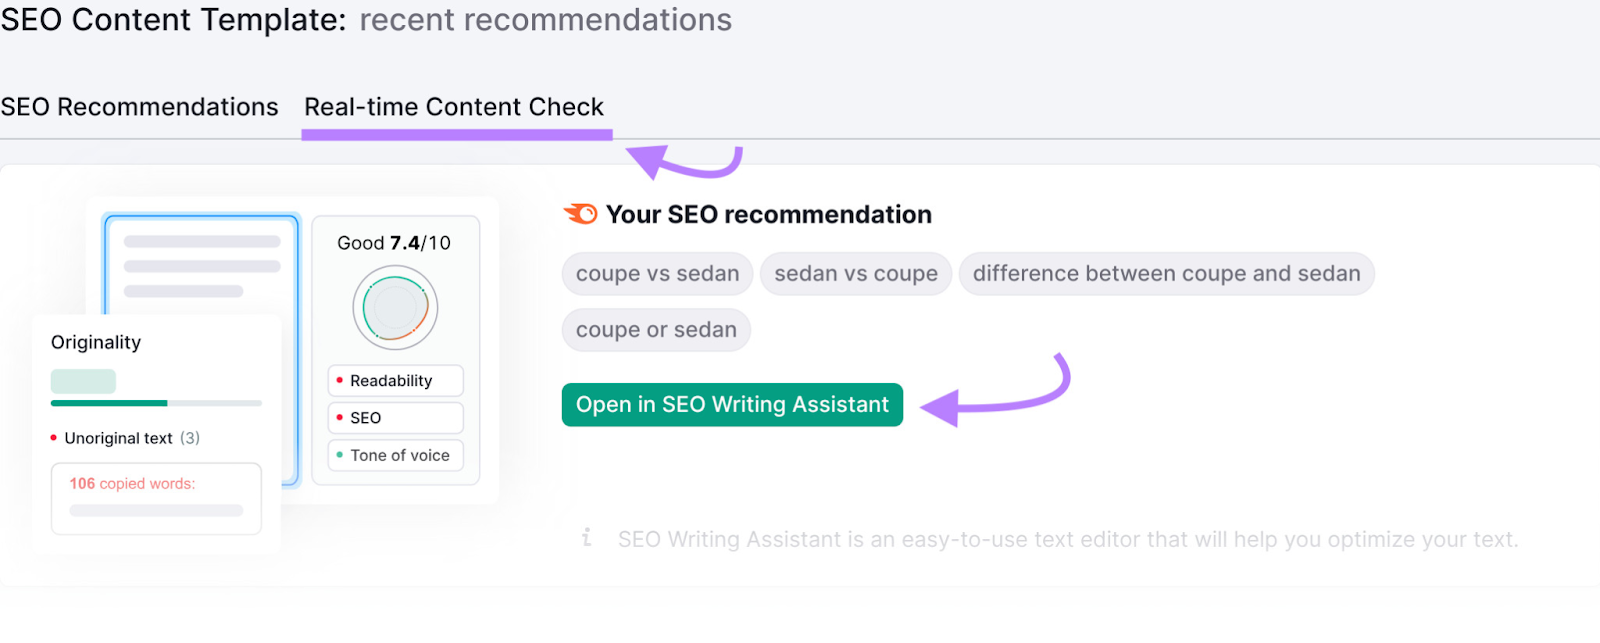 “Real-time Content Check" and “Open in SEO Writing Assistant” buttons highlighted